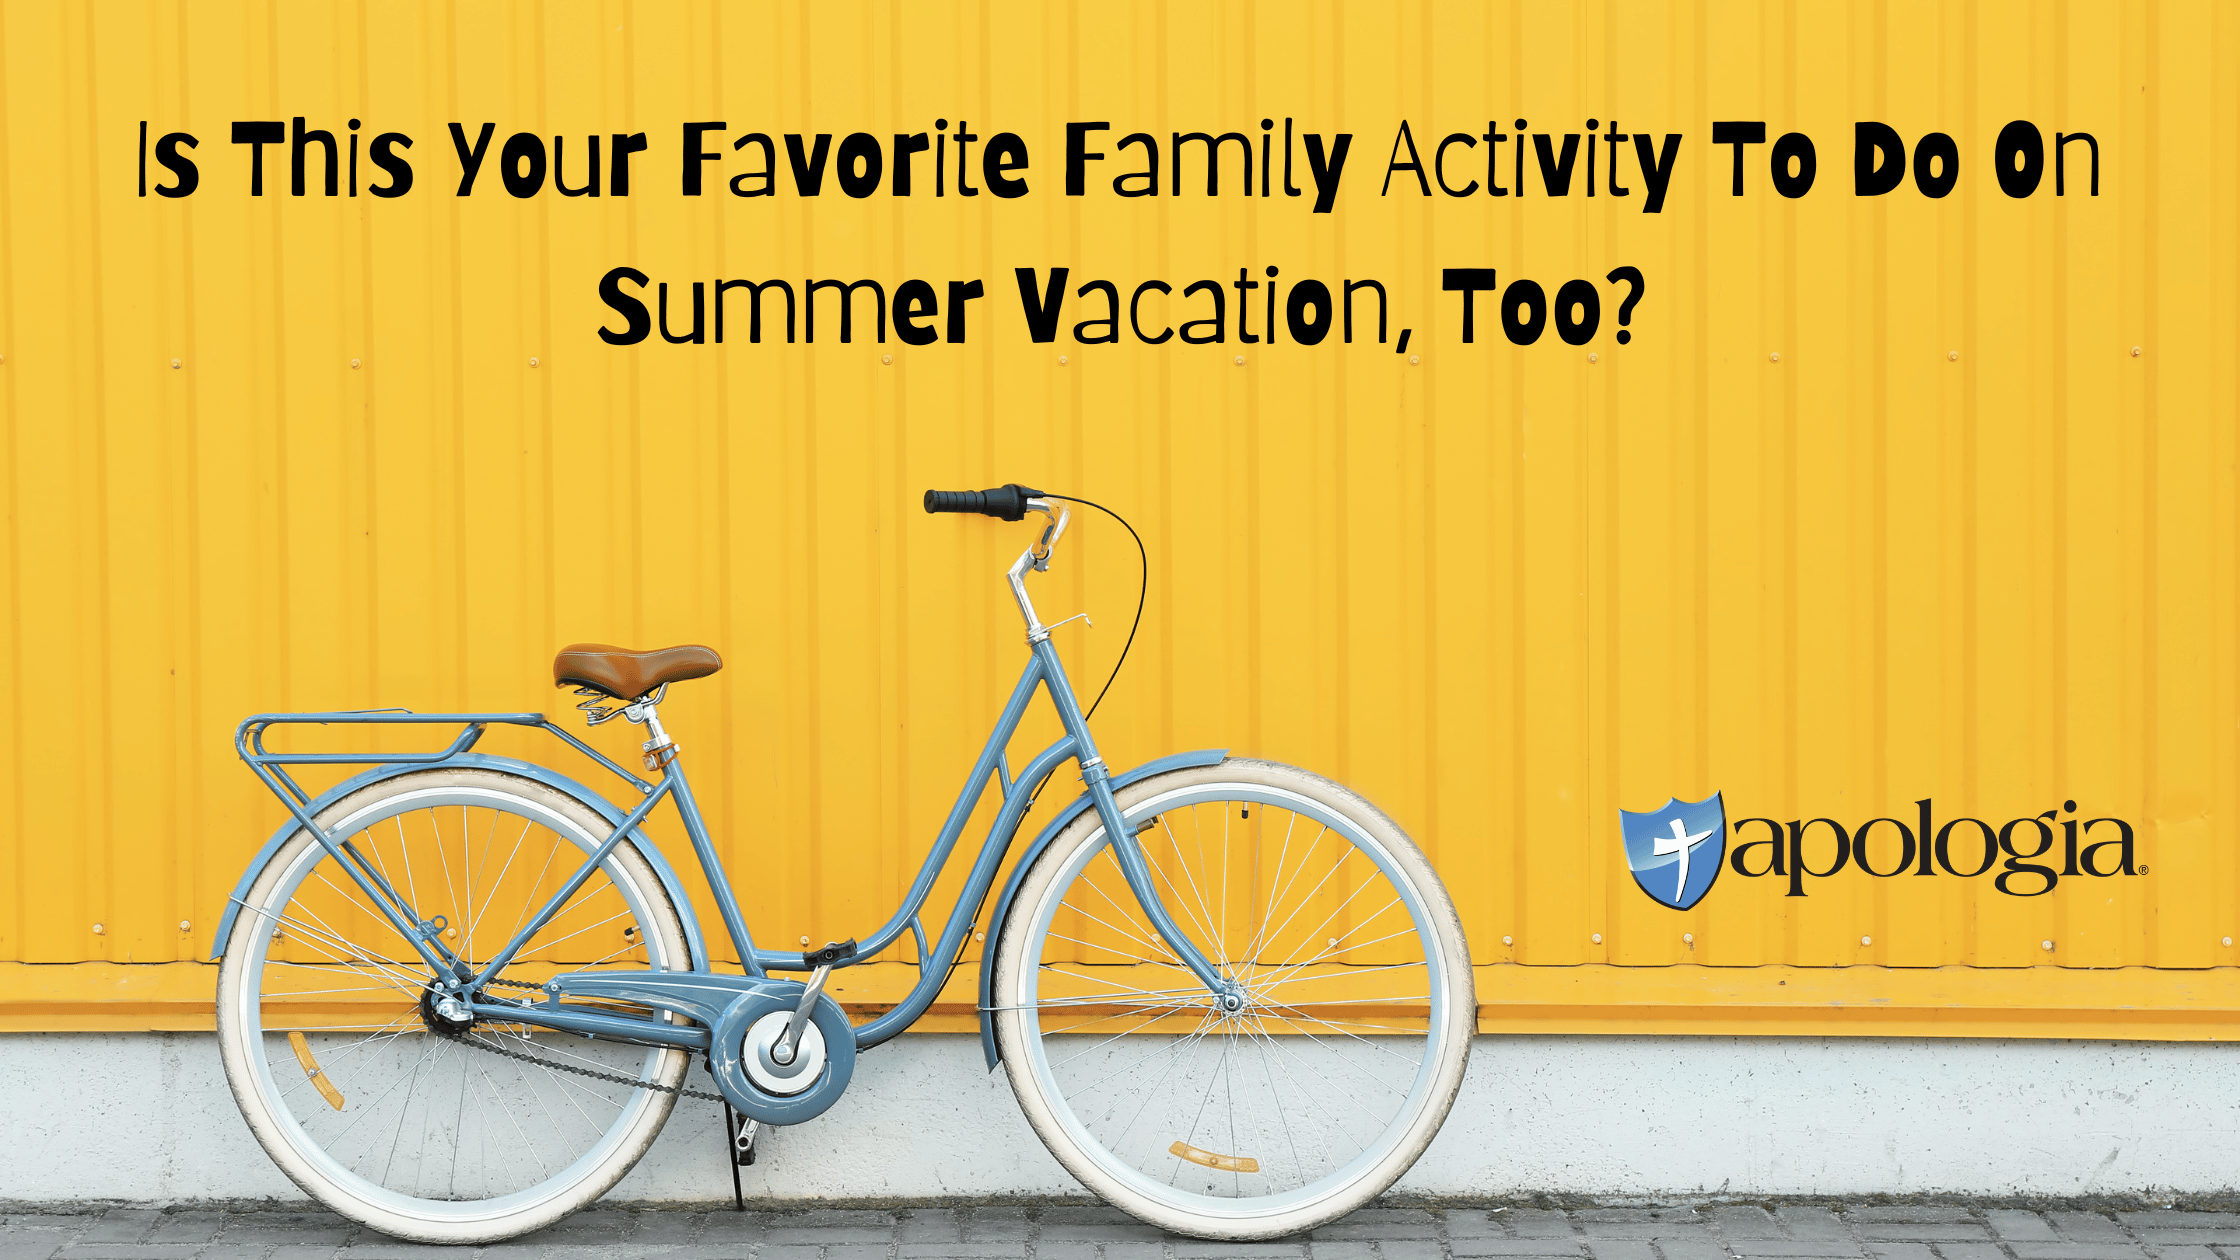 Is This Your Favorite Family Activity To Do On Summer Vacation Too?